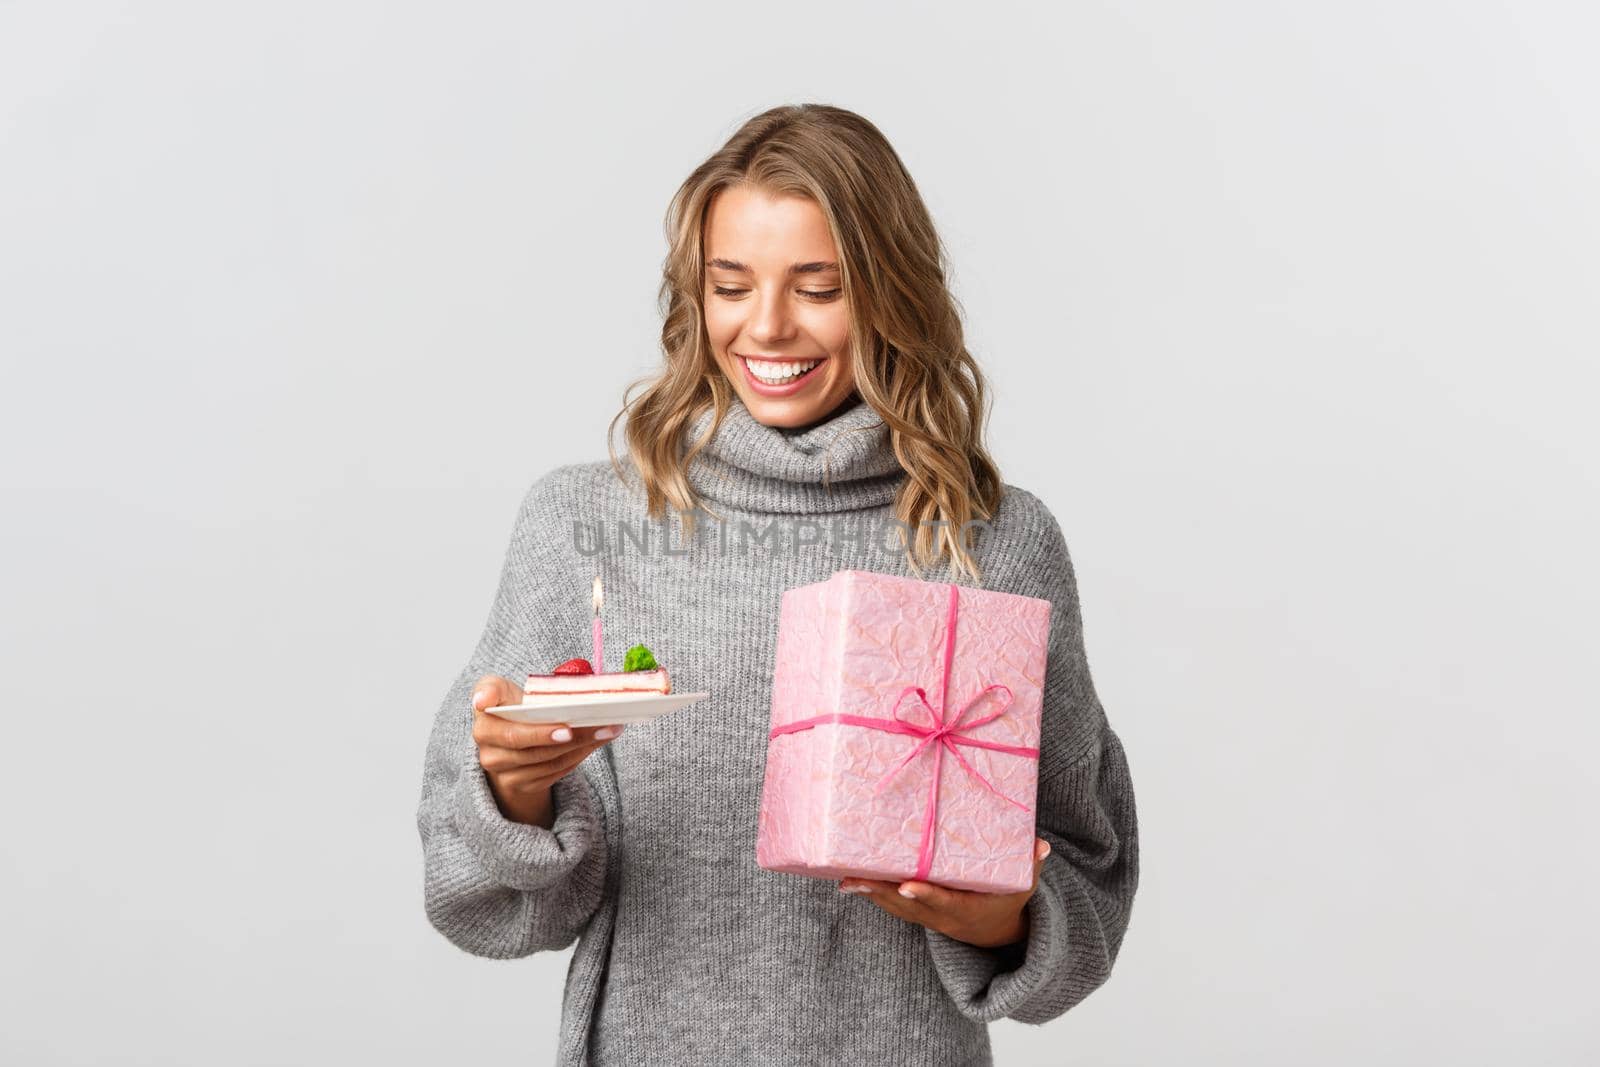 Studio shot of happy blond female model in grey sweater, looking at birthday cake, holding gift, celebrating b-day, standing over white background.